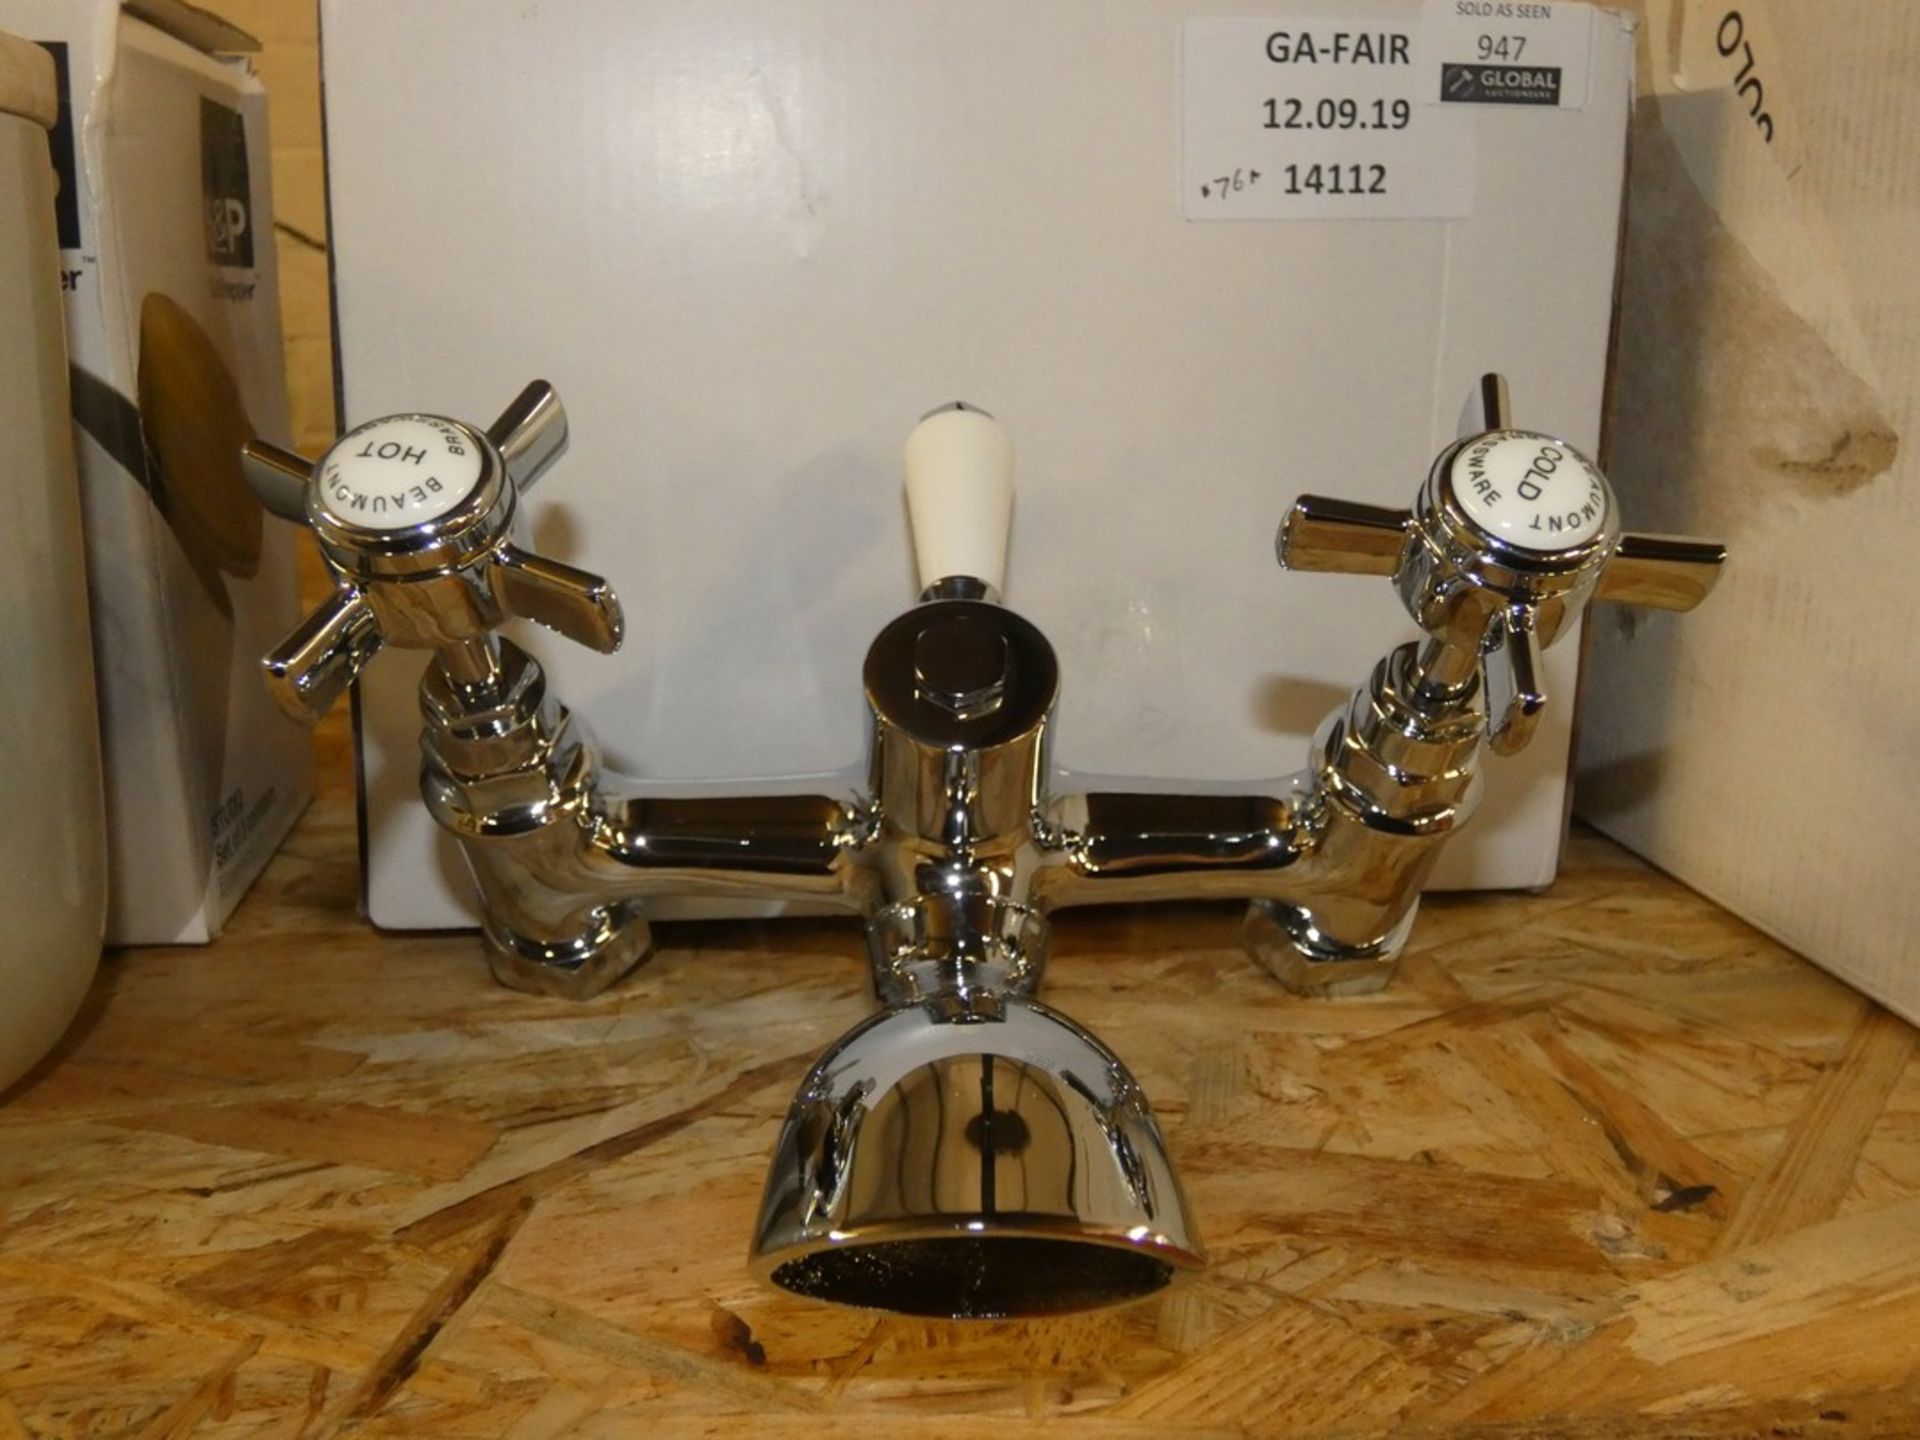 Stainless Steel Hot and Cold Mixer Tap Set RRP £80 (14112) (Public Viewing and Appraisals